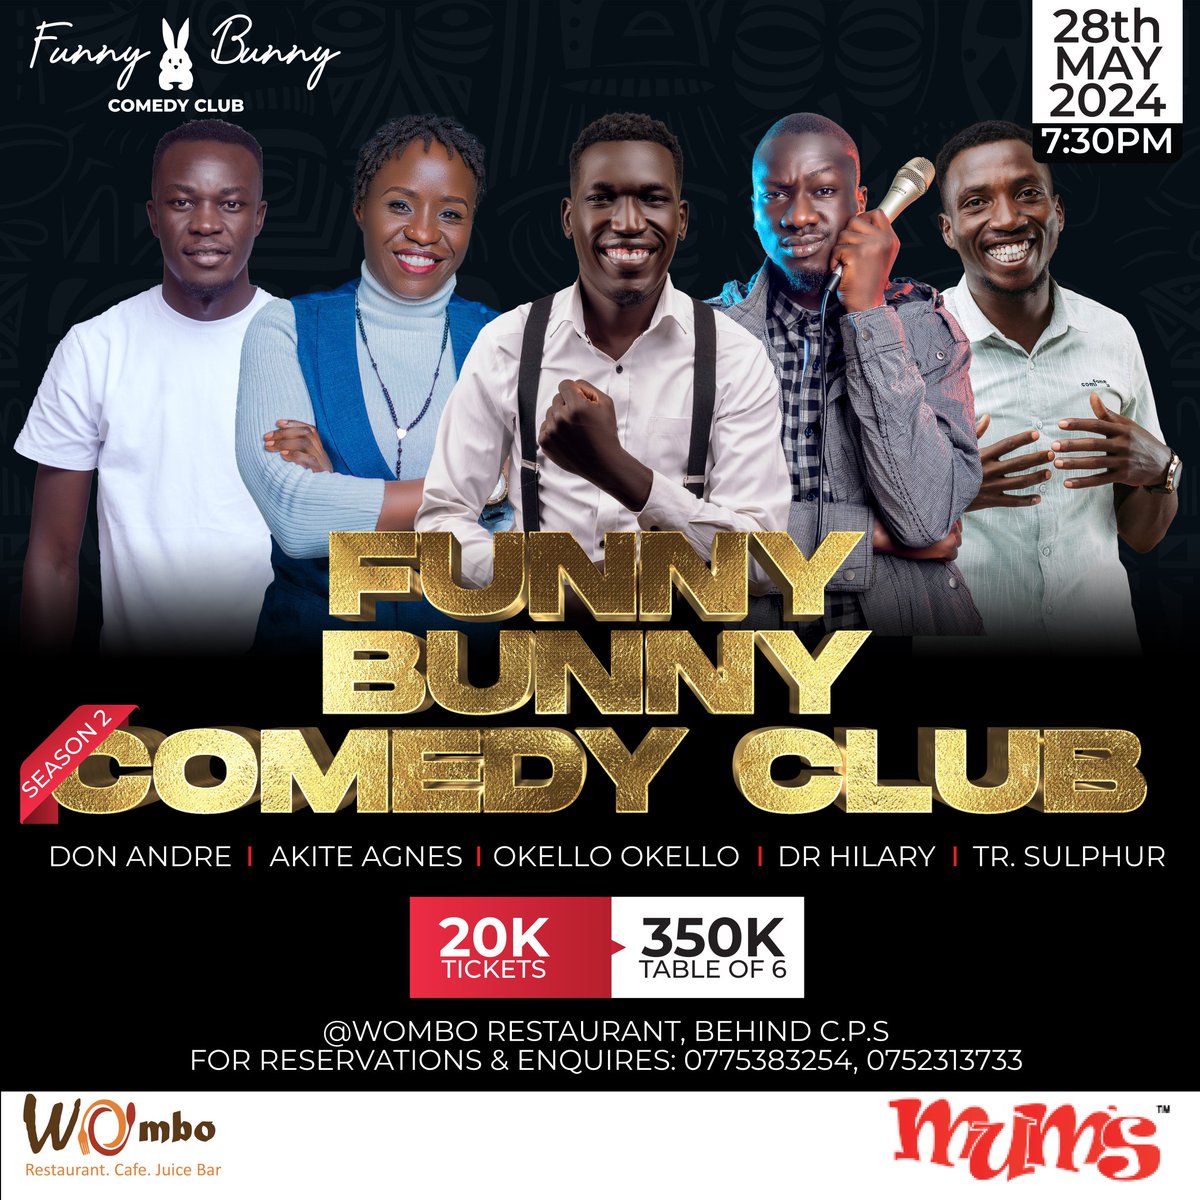 Get your MCM a ticket and come enjoy the evening with @Funnybunnyug comedy.☺️☺️☺️ #FunnyBunnyComedyClub